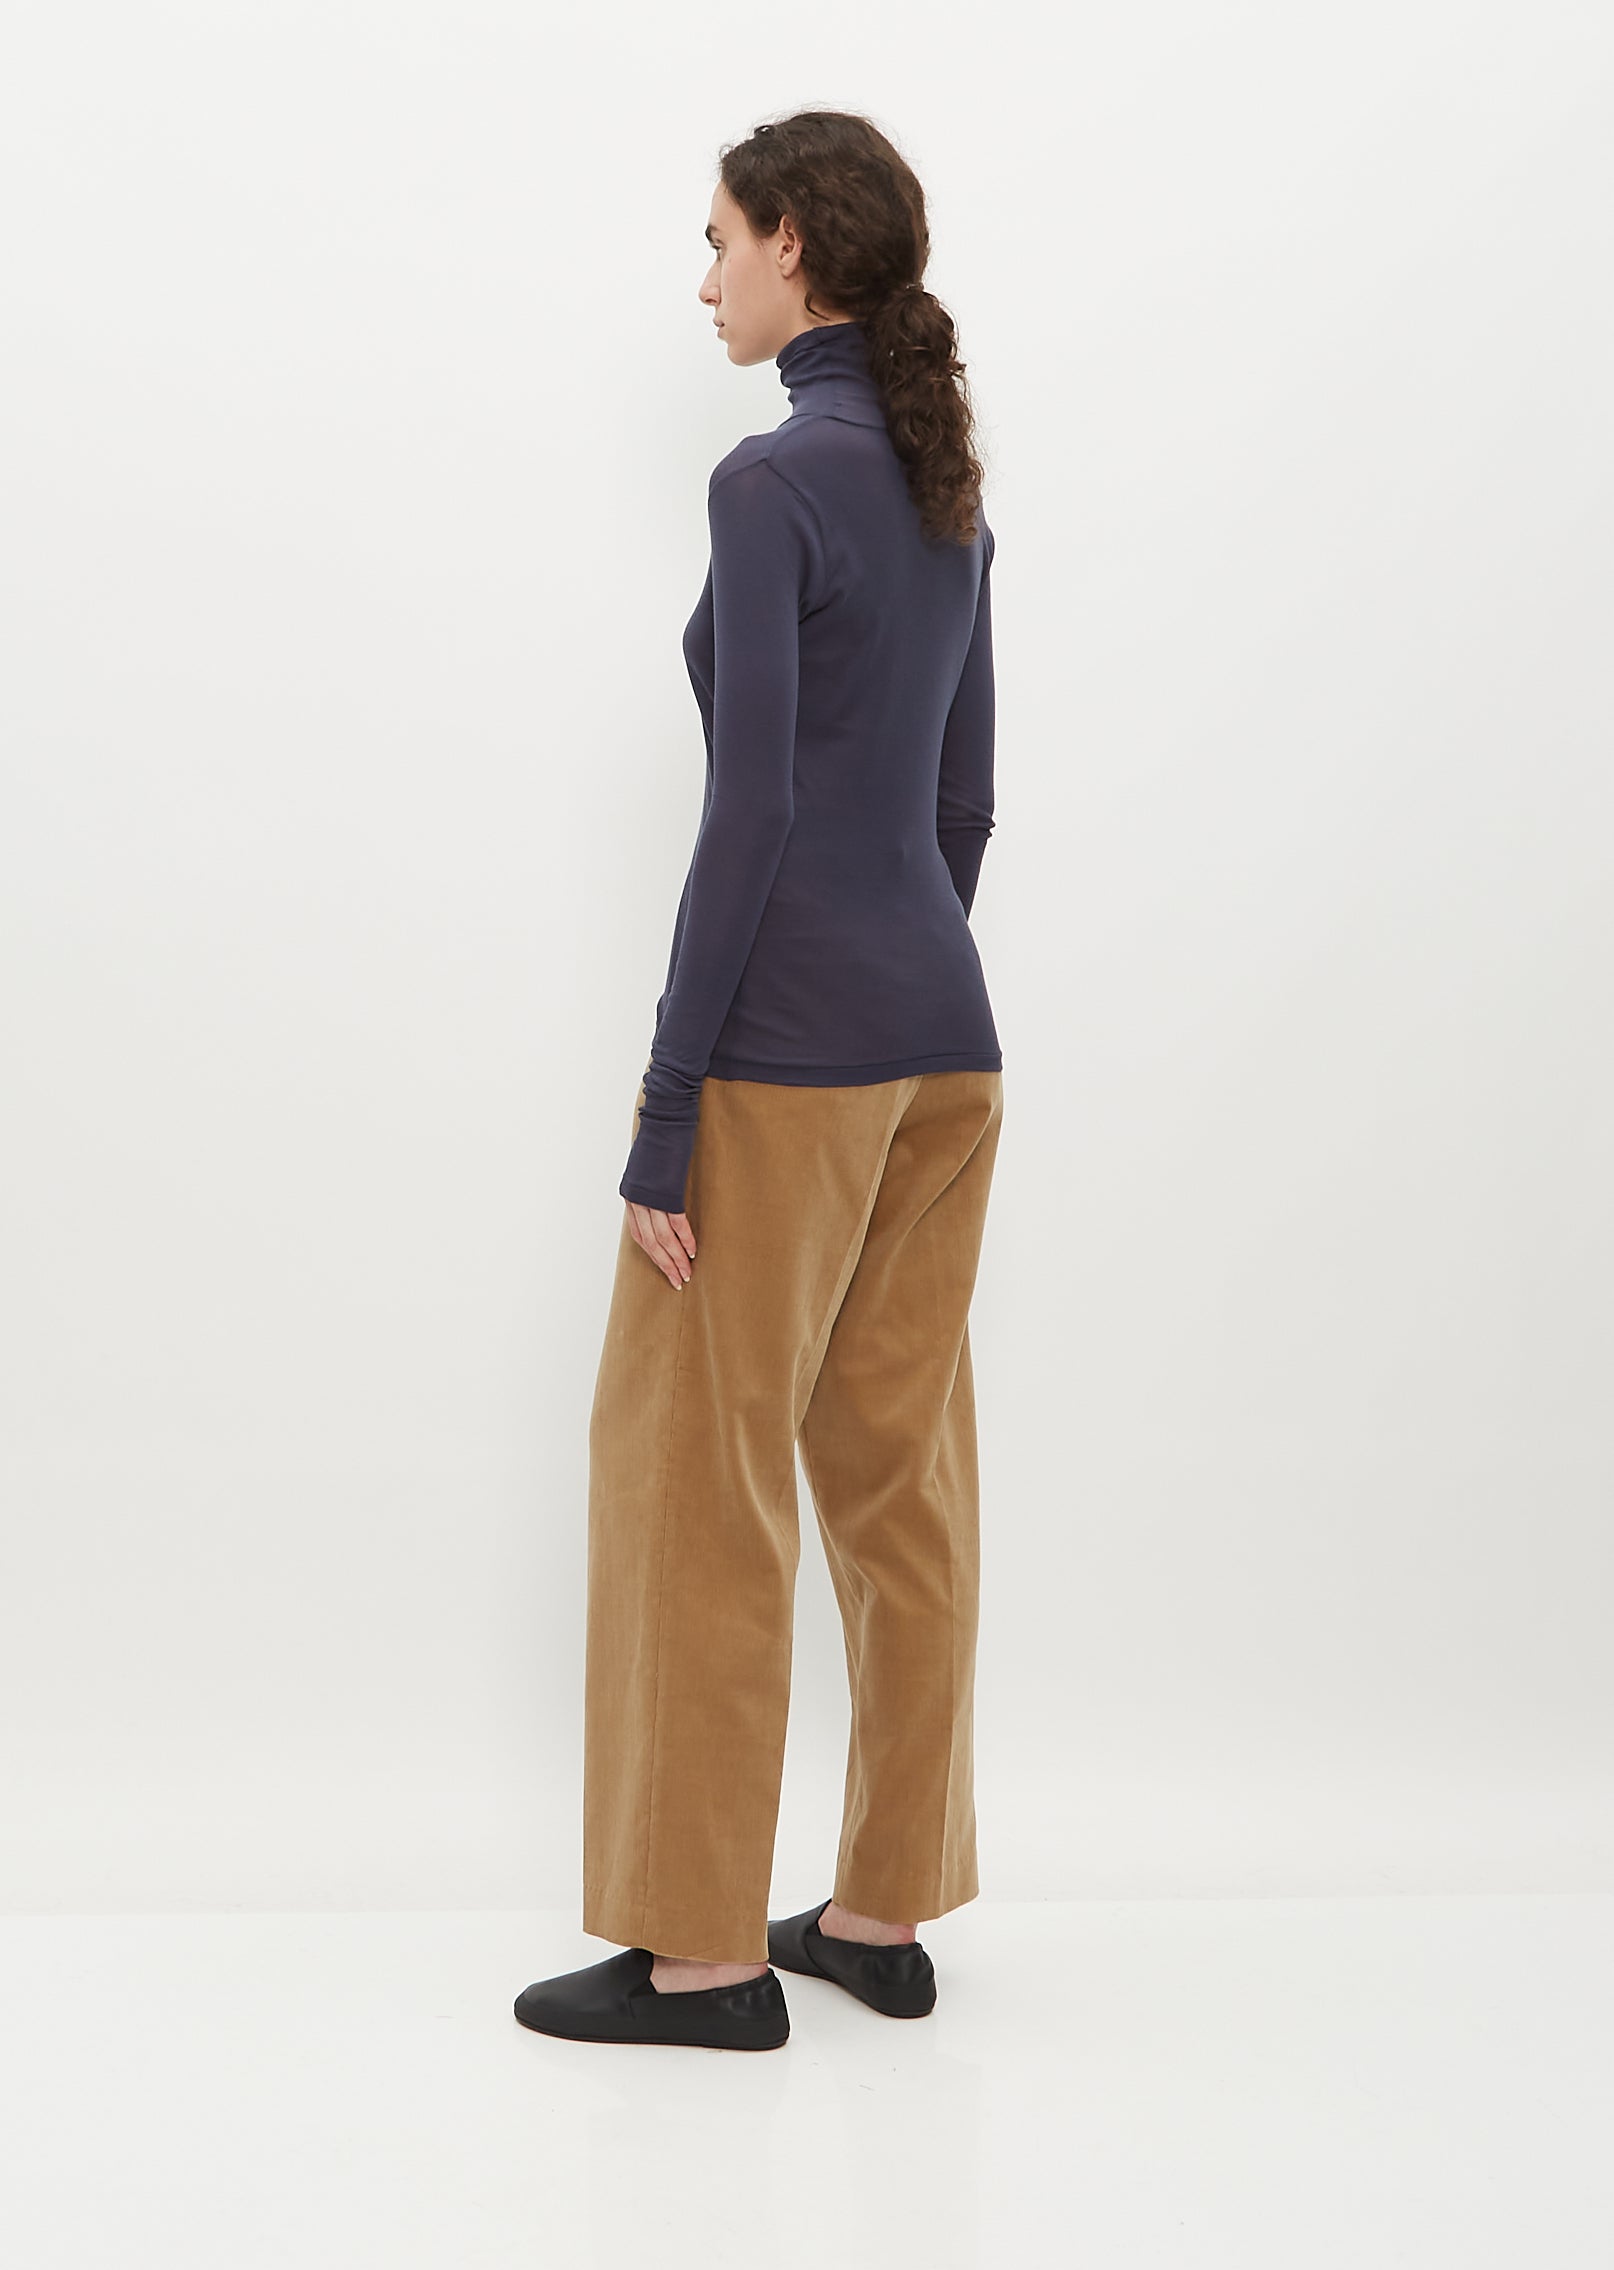 Light Breeze Sweater - All About Ami